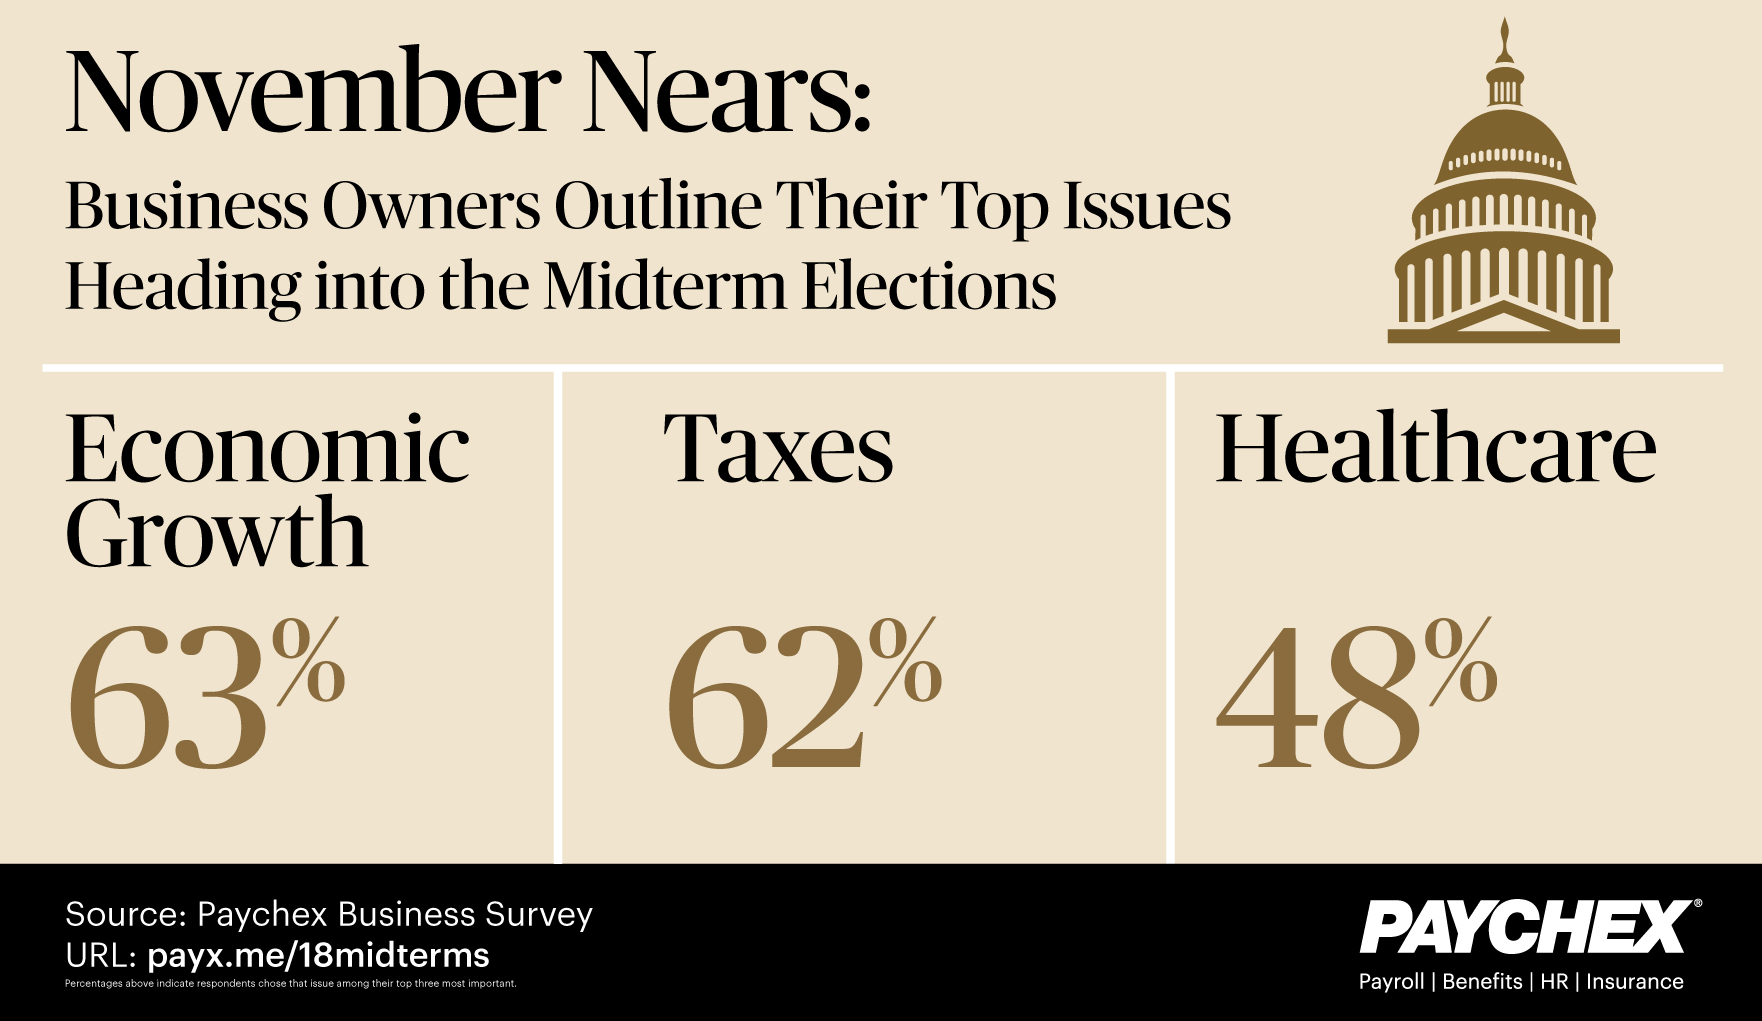 Infographic showing business owner's top issues heading into the midterm elections